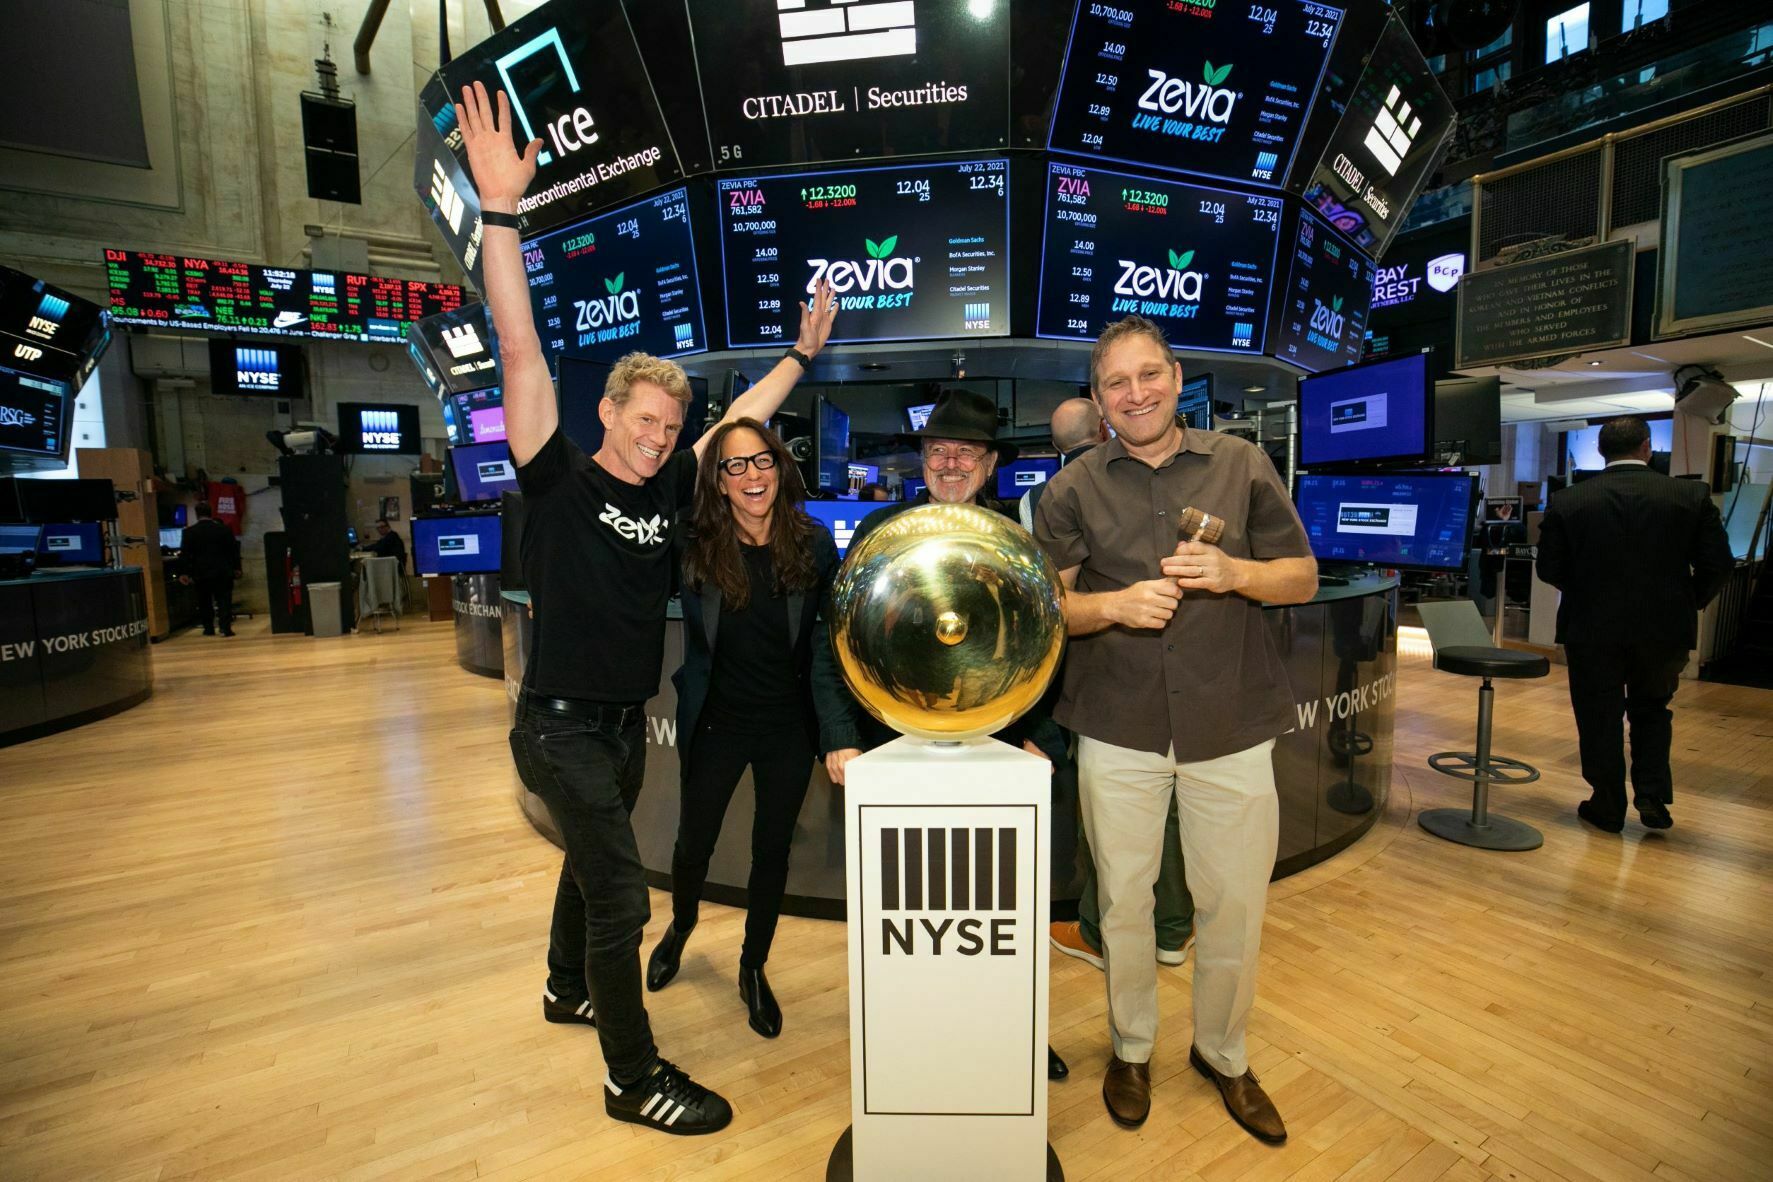 The Zevia Braintrust at the New York Stock Exchange: (L to R) Paddy Spence, CEO; Amy Taylor, President; Robert Gay, Chief Strategy Officer ; Hank Margolis, Chief Operating Officer